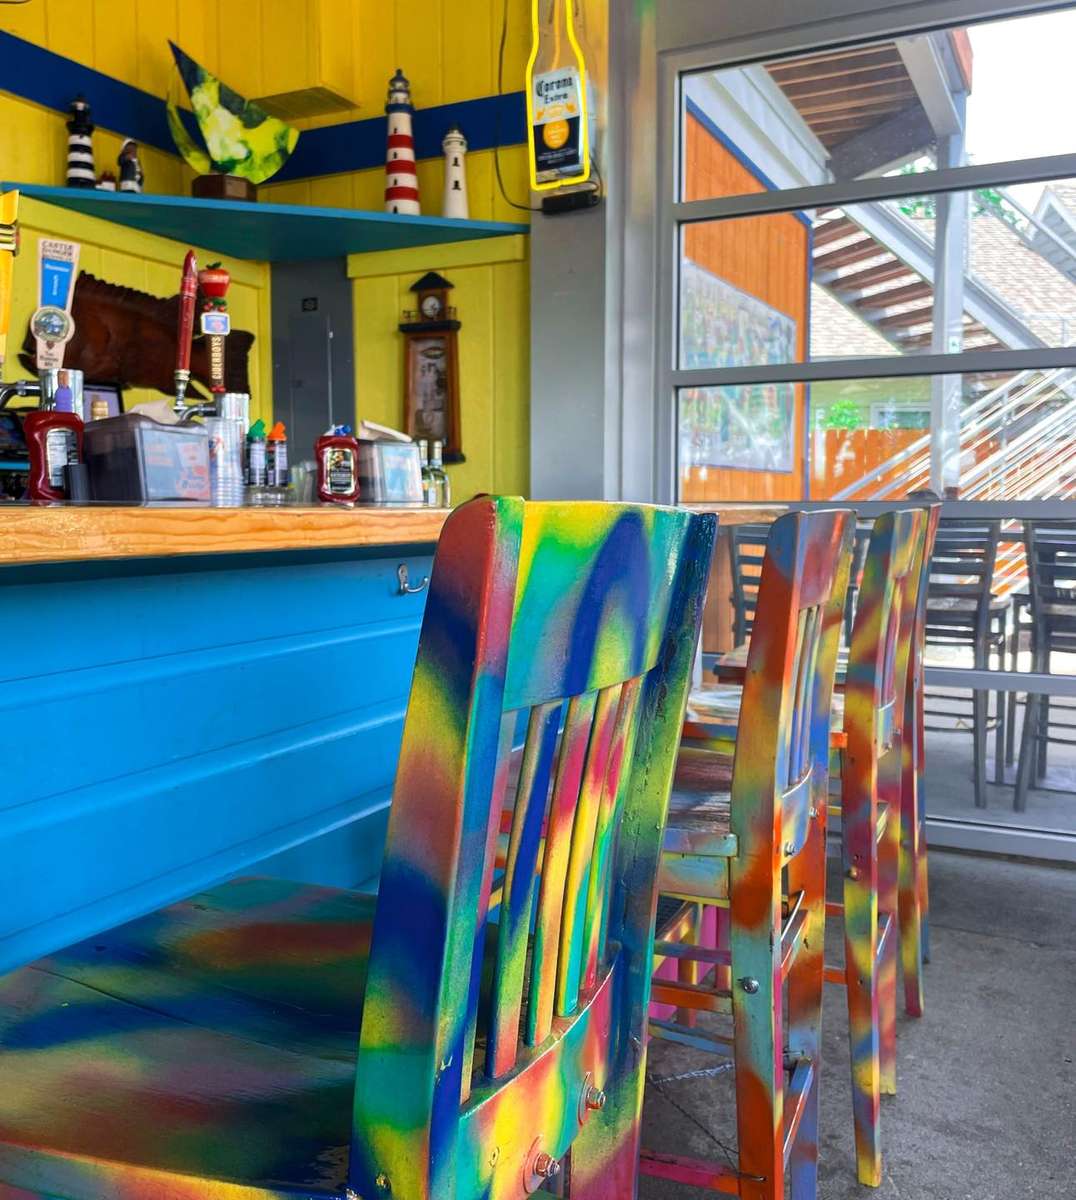 Bar area with colorful chairs